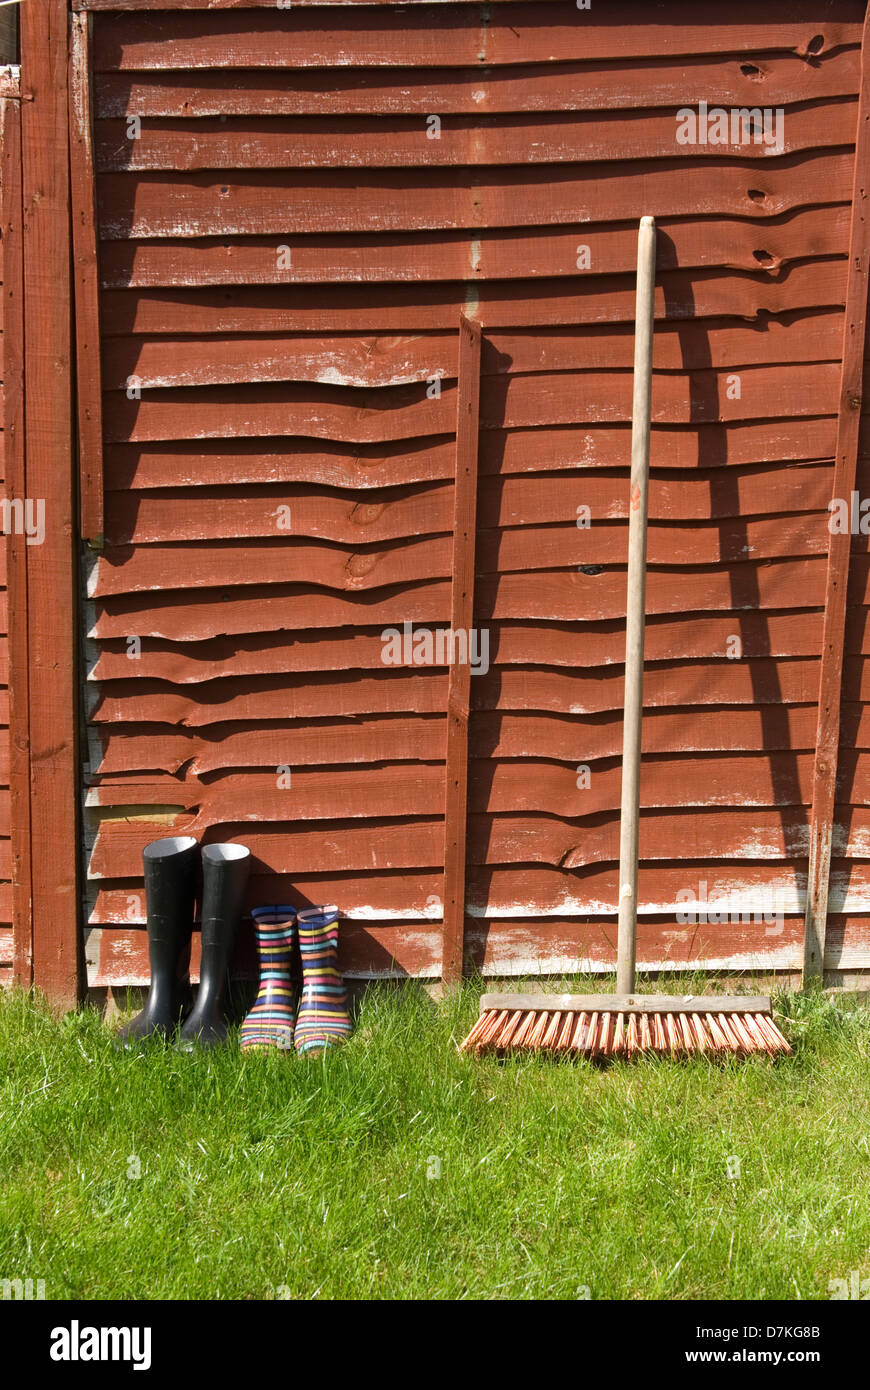 wellington boots drying against fence Stock Photo